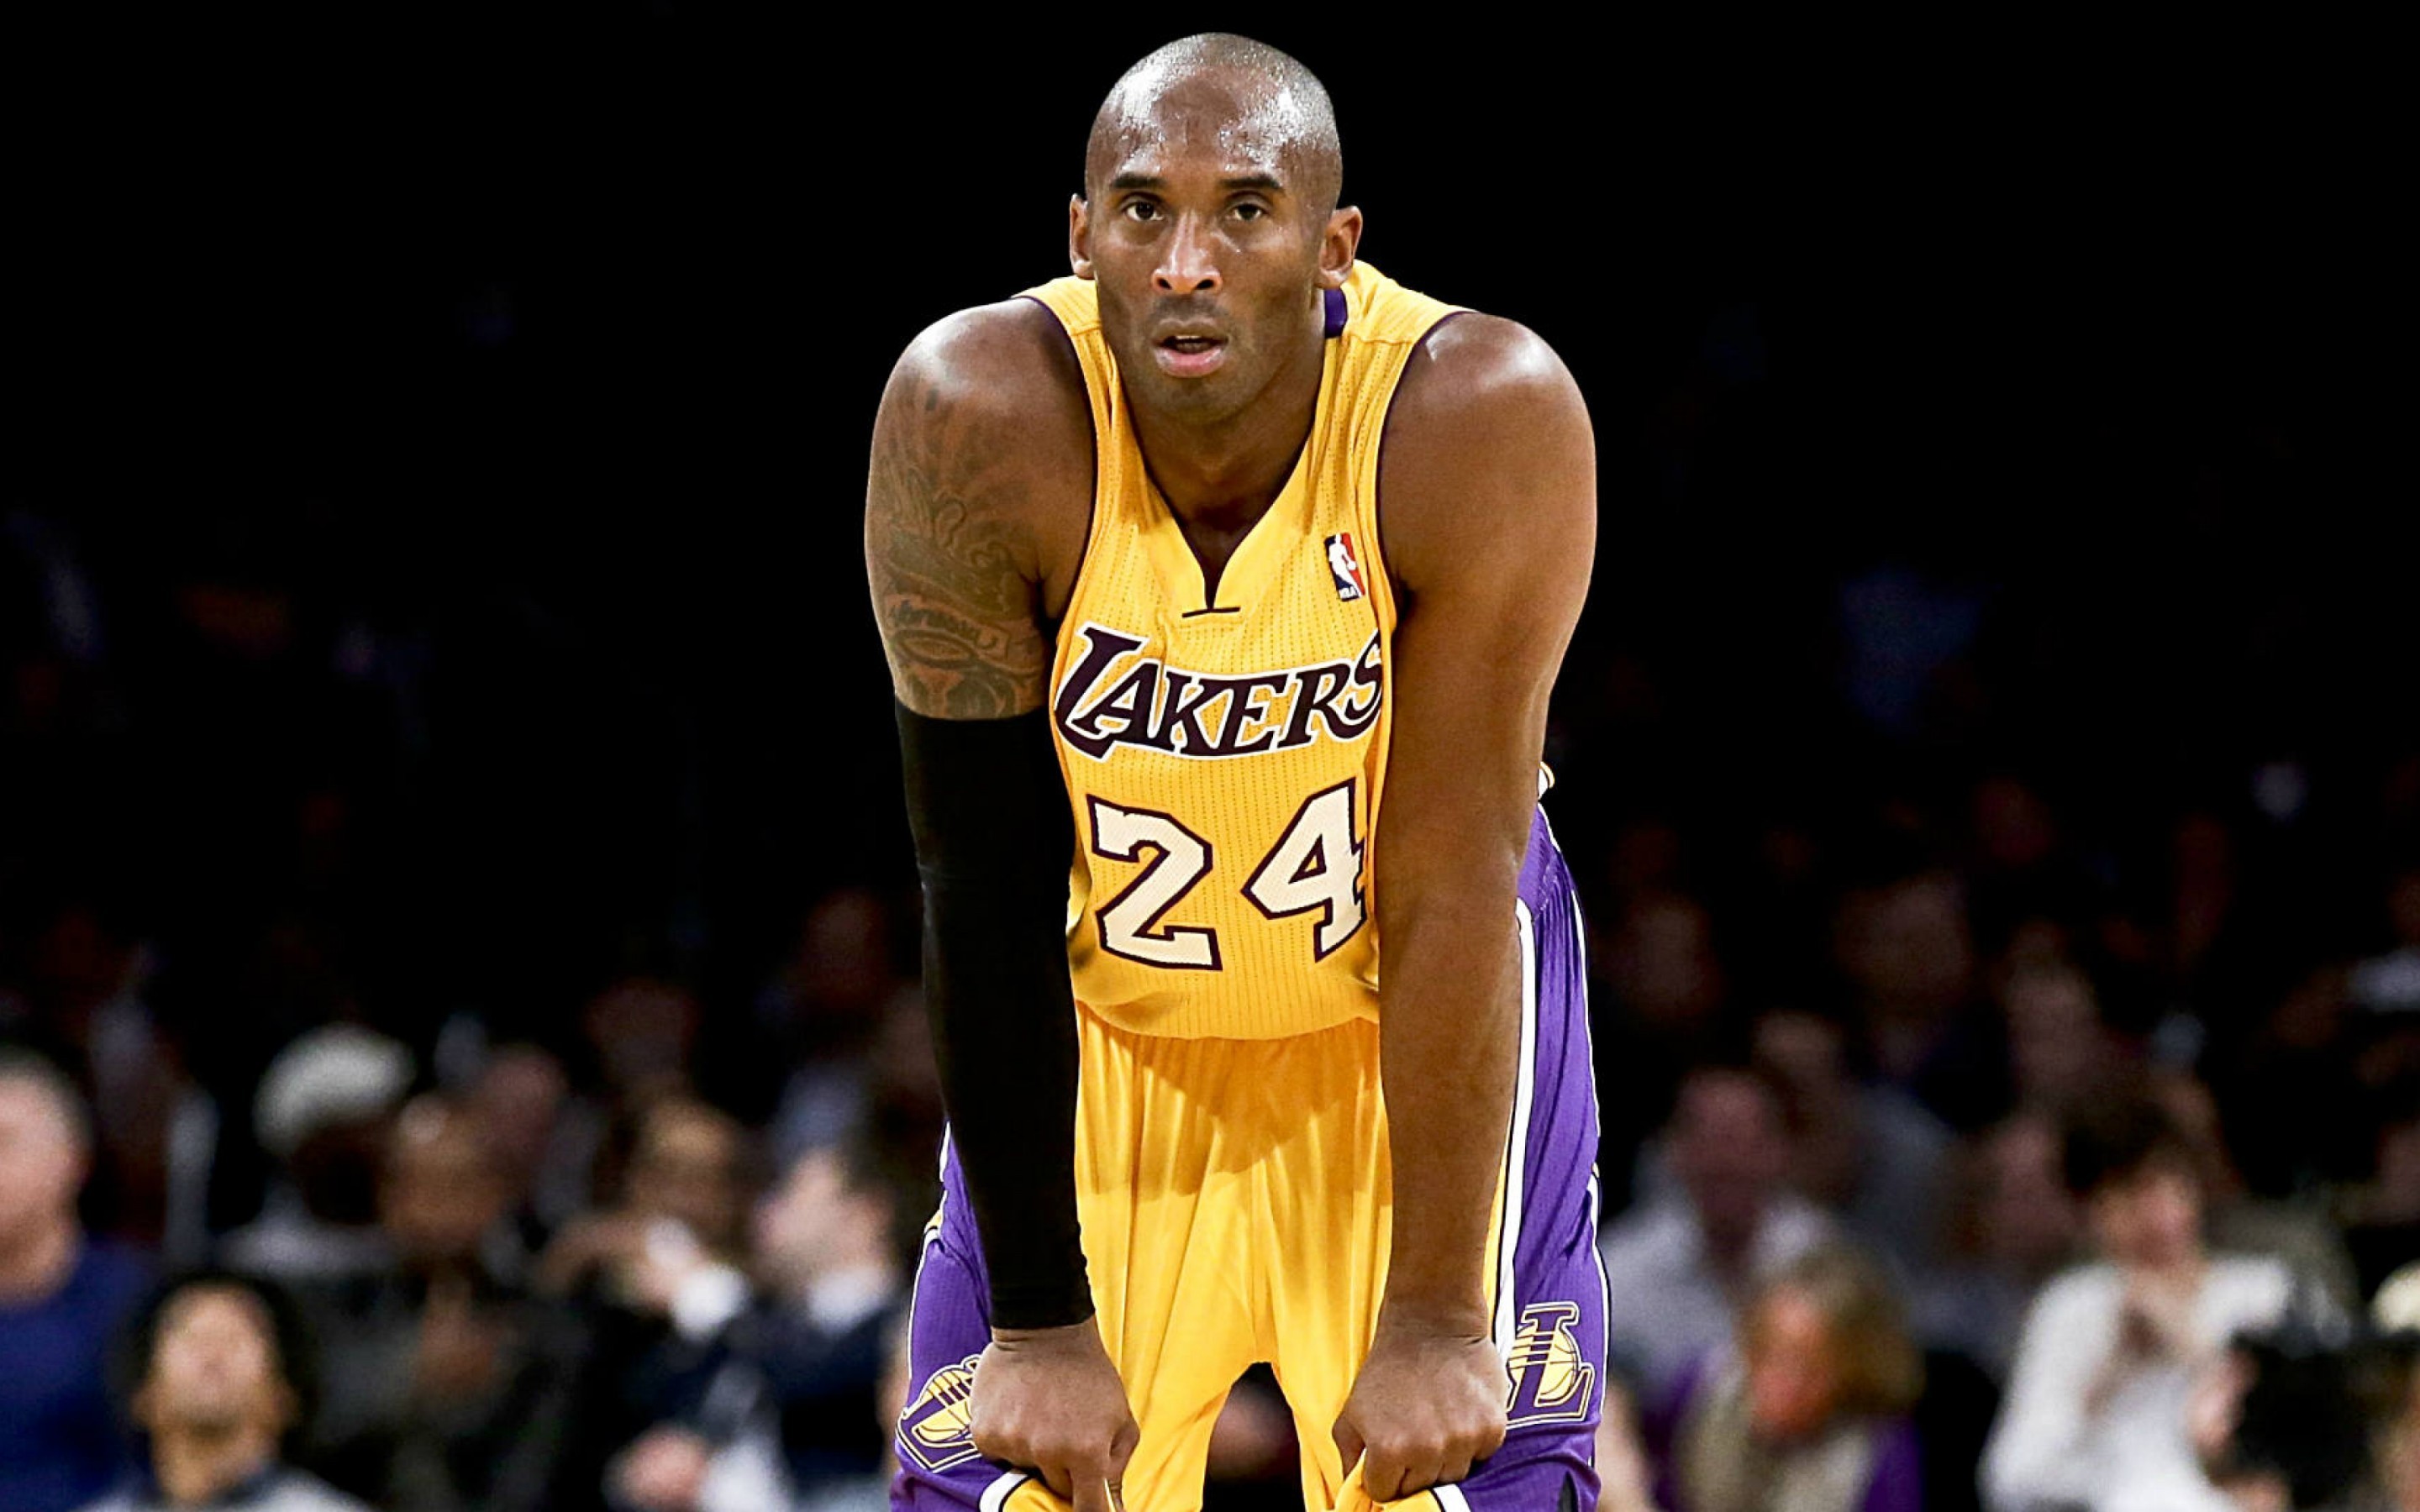 2880x1800 Kobe Bryant Wallpapers For Iphone On Wallpaper Hd 2880 x 1800 px 1.52 MB  dunk 5